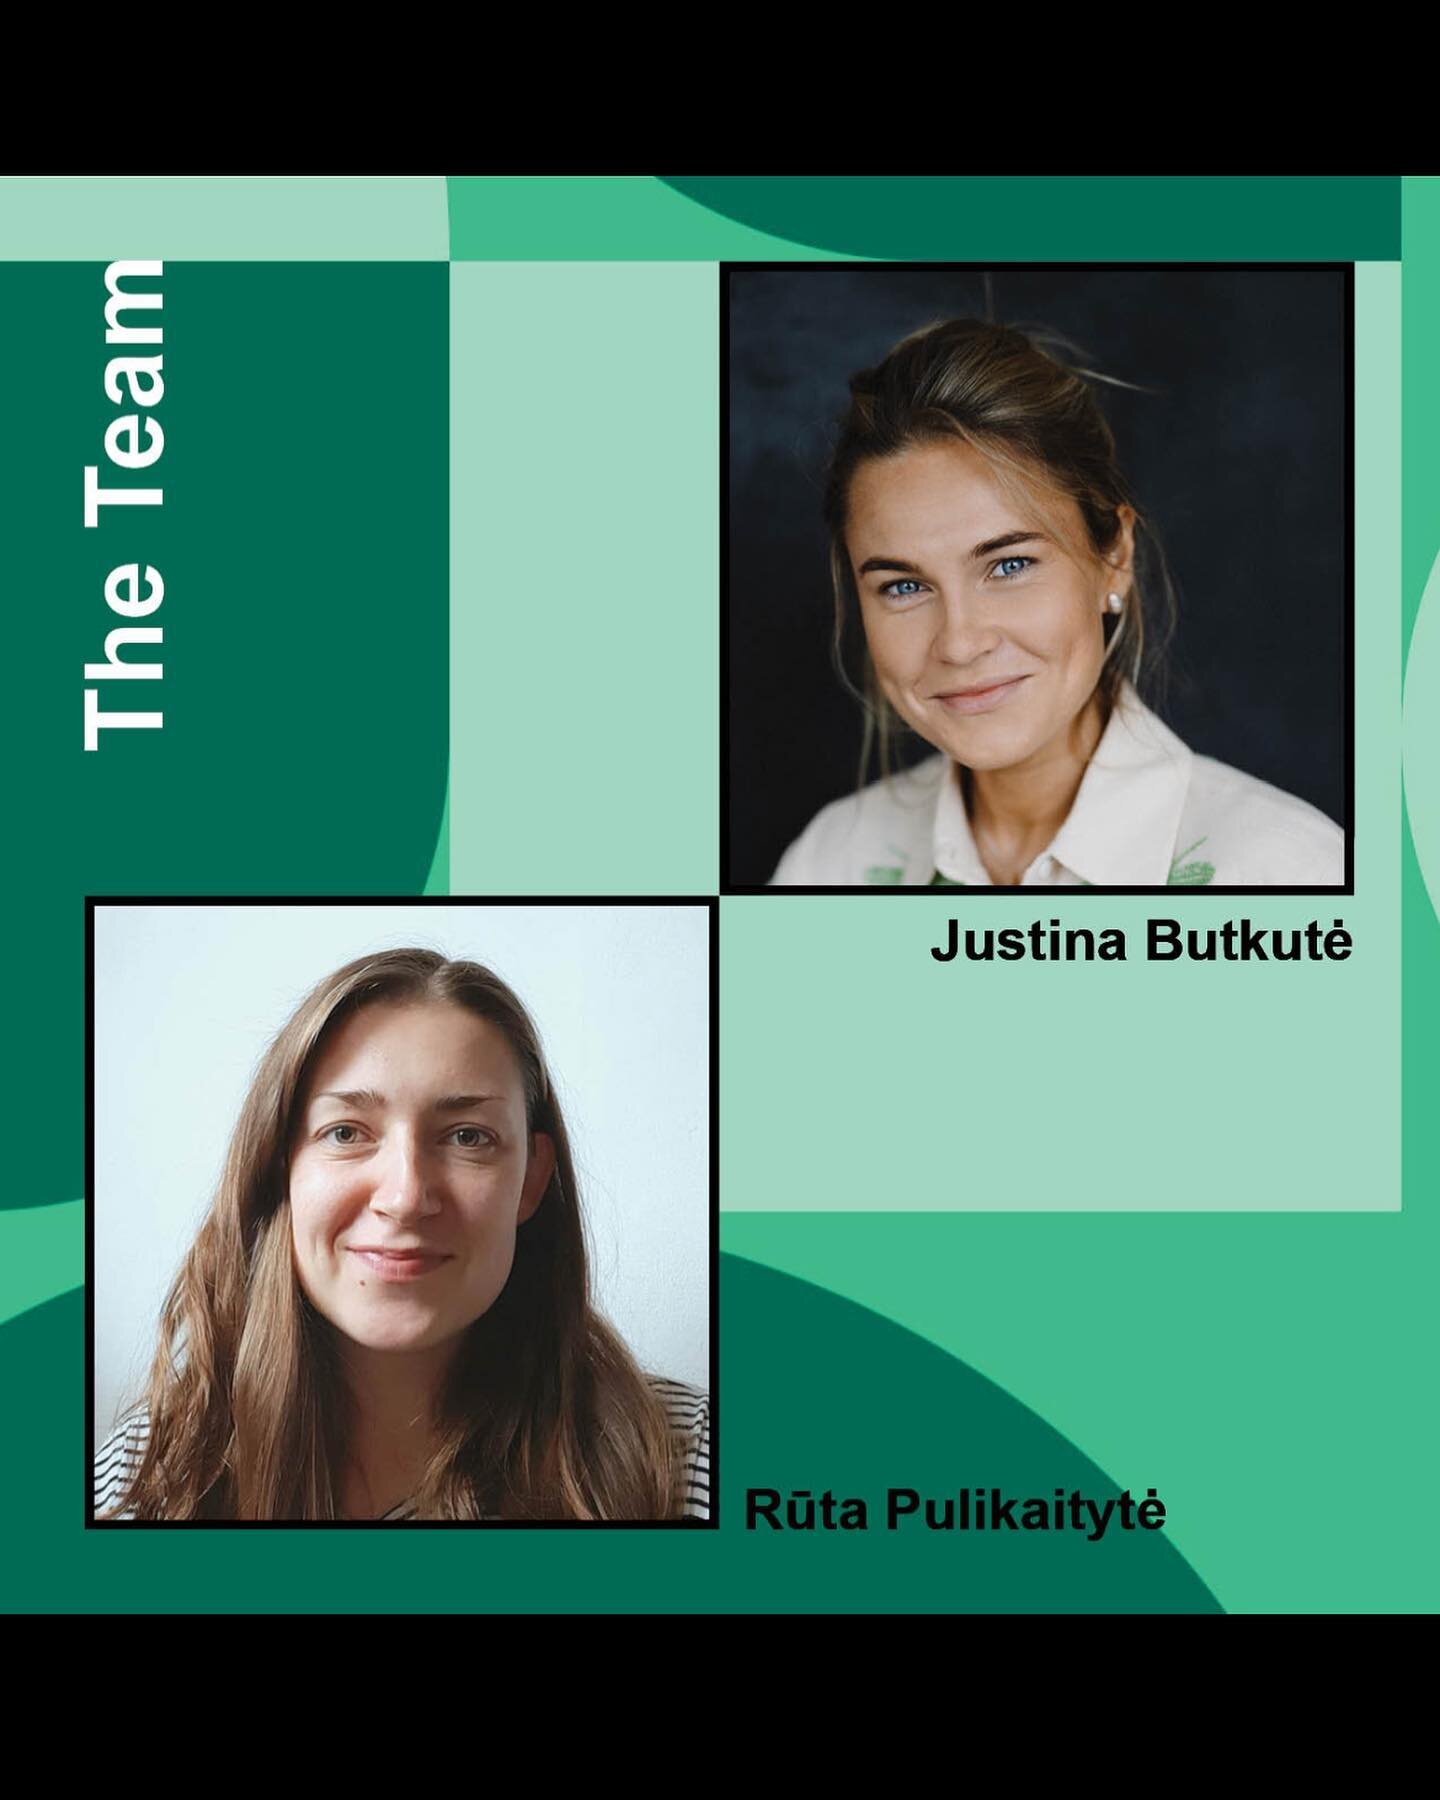 🌞 Exciting news! Our team is growing and we're thrilled to welcome @pulikaityte and @justina_butkute.jpg 

They'll be working their magic to enhance our visuality. 🎨
Get ready for some stunning designs and eye-catching graphics and photos. 

Help u